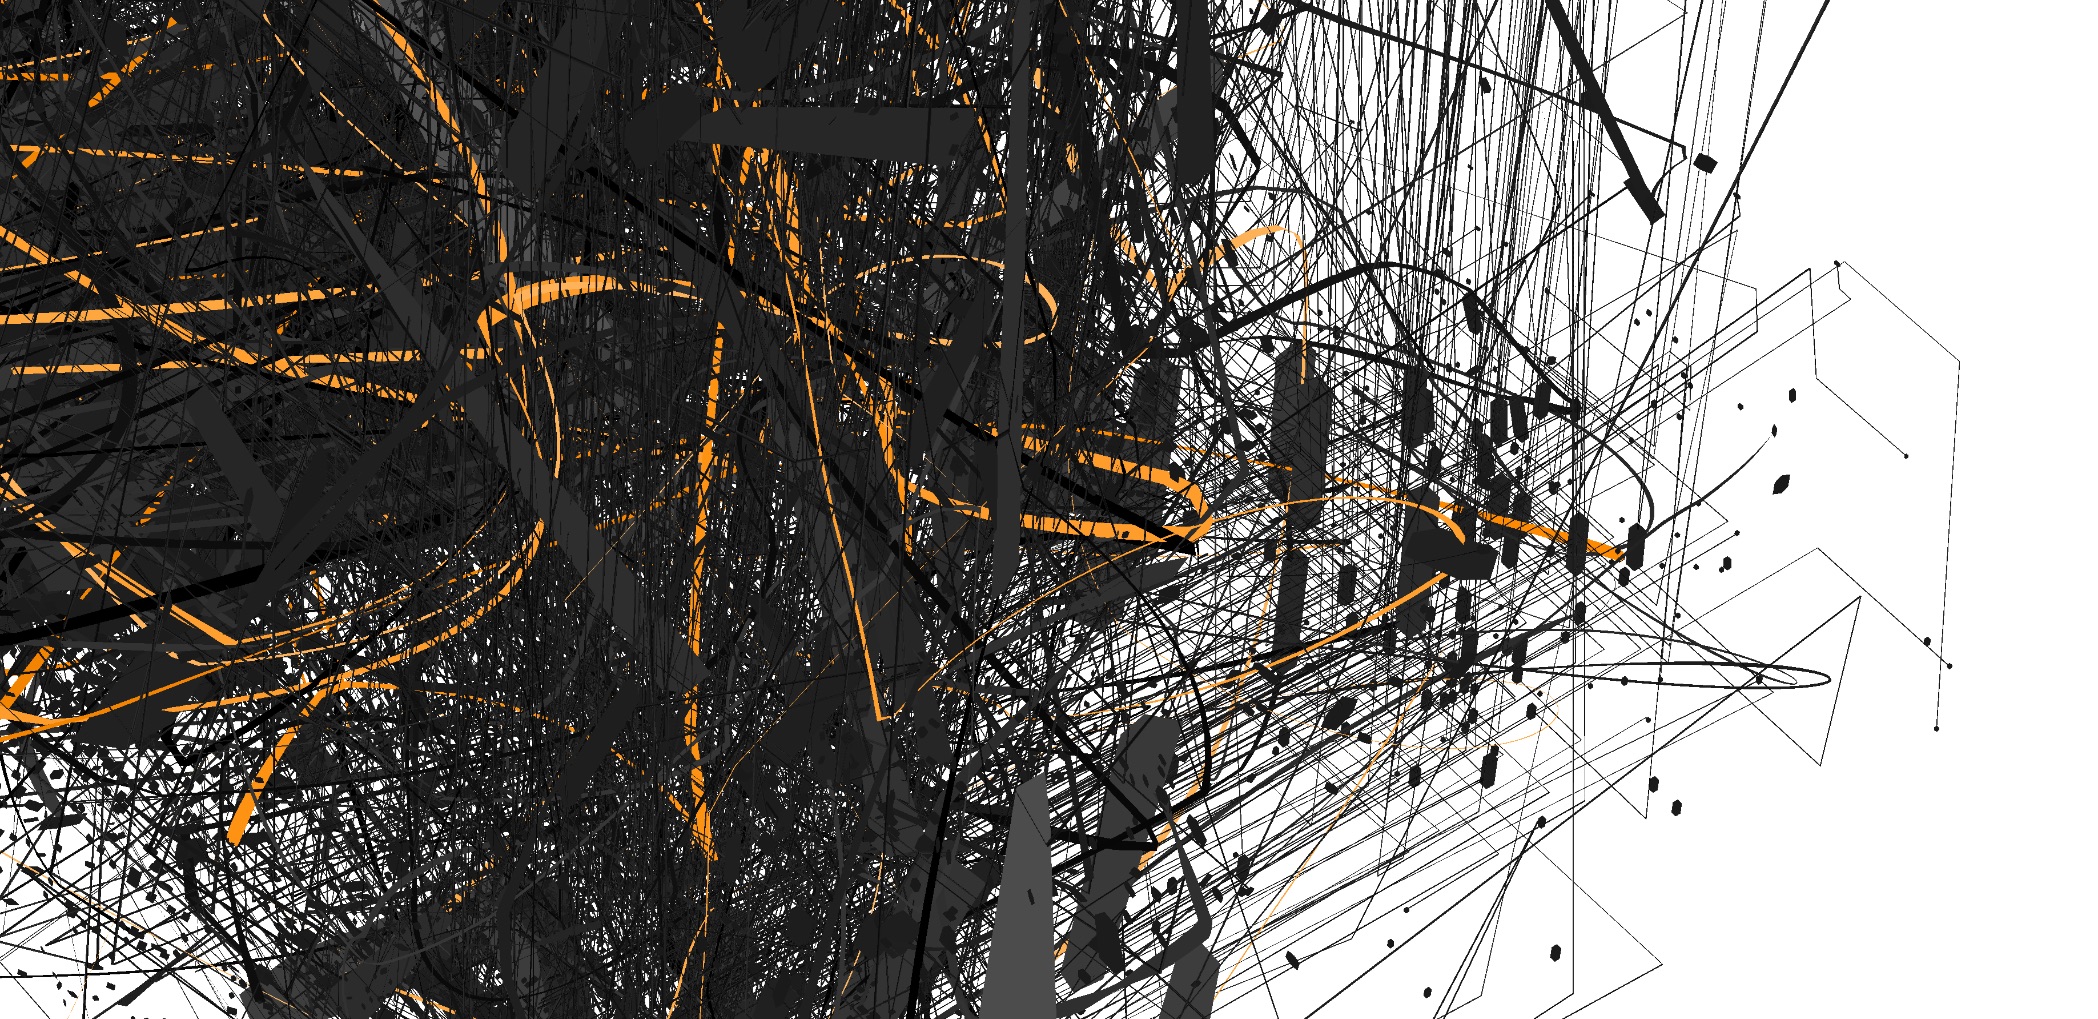 A detail of Amazon's graph. Thin lines are network connections, while thicker ones represent individual network nodes scaled by their "fan out" coefficient (the number of connections it has to other nodes).